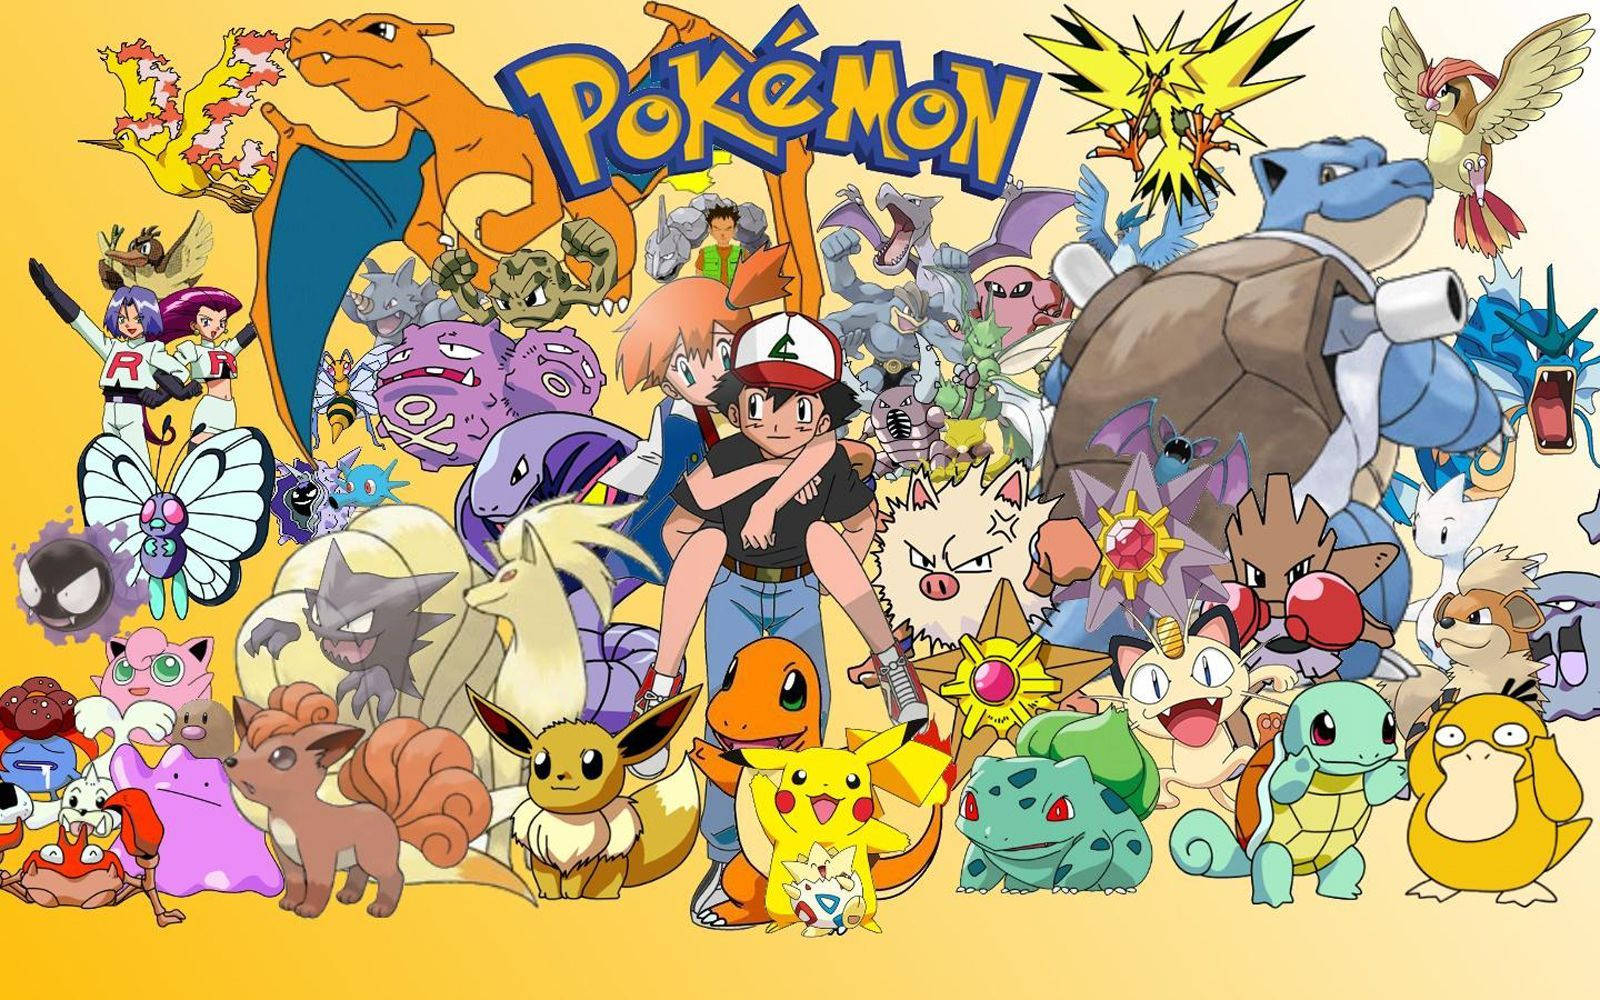 Ash Ketchum and Misty explore the world of Pokemon Wallpaper